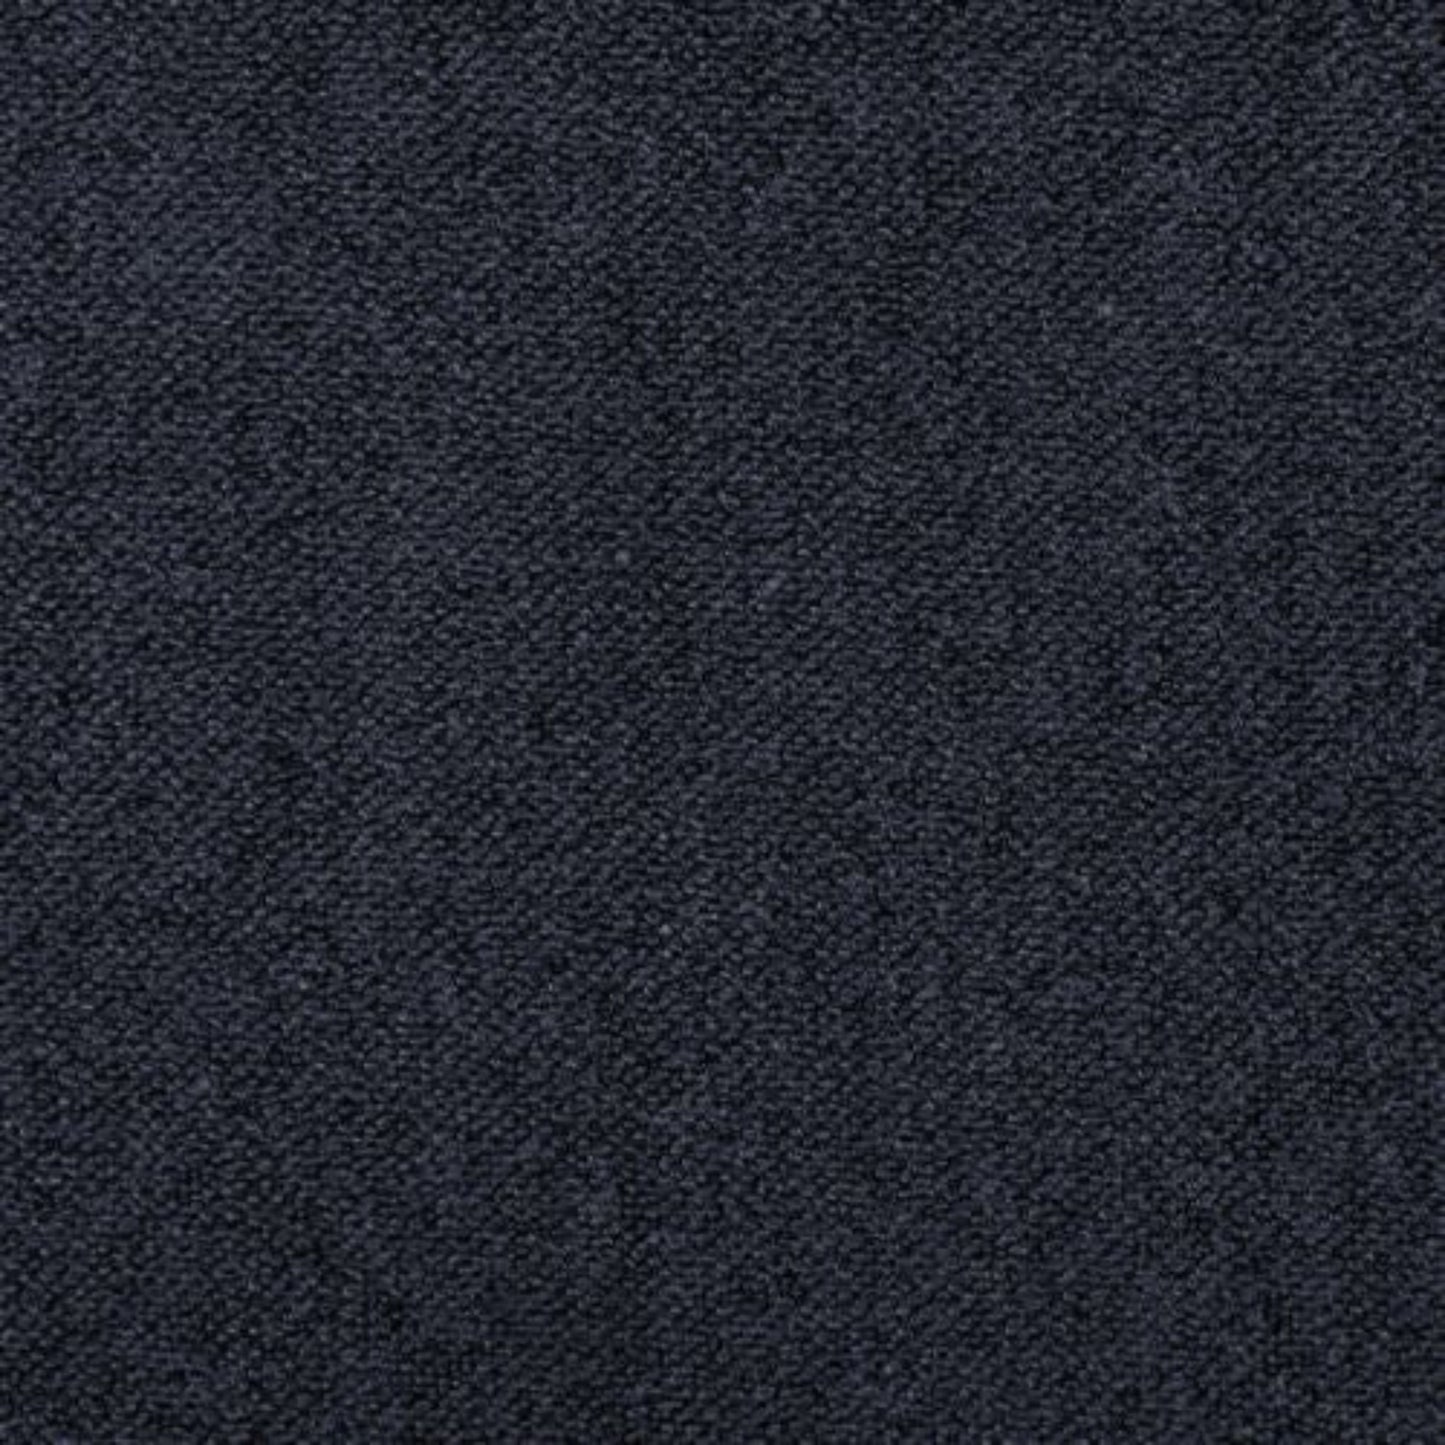 Colby dark blue polyester blend 2 seat fabric sofa